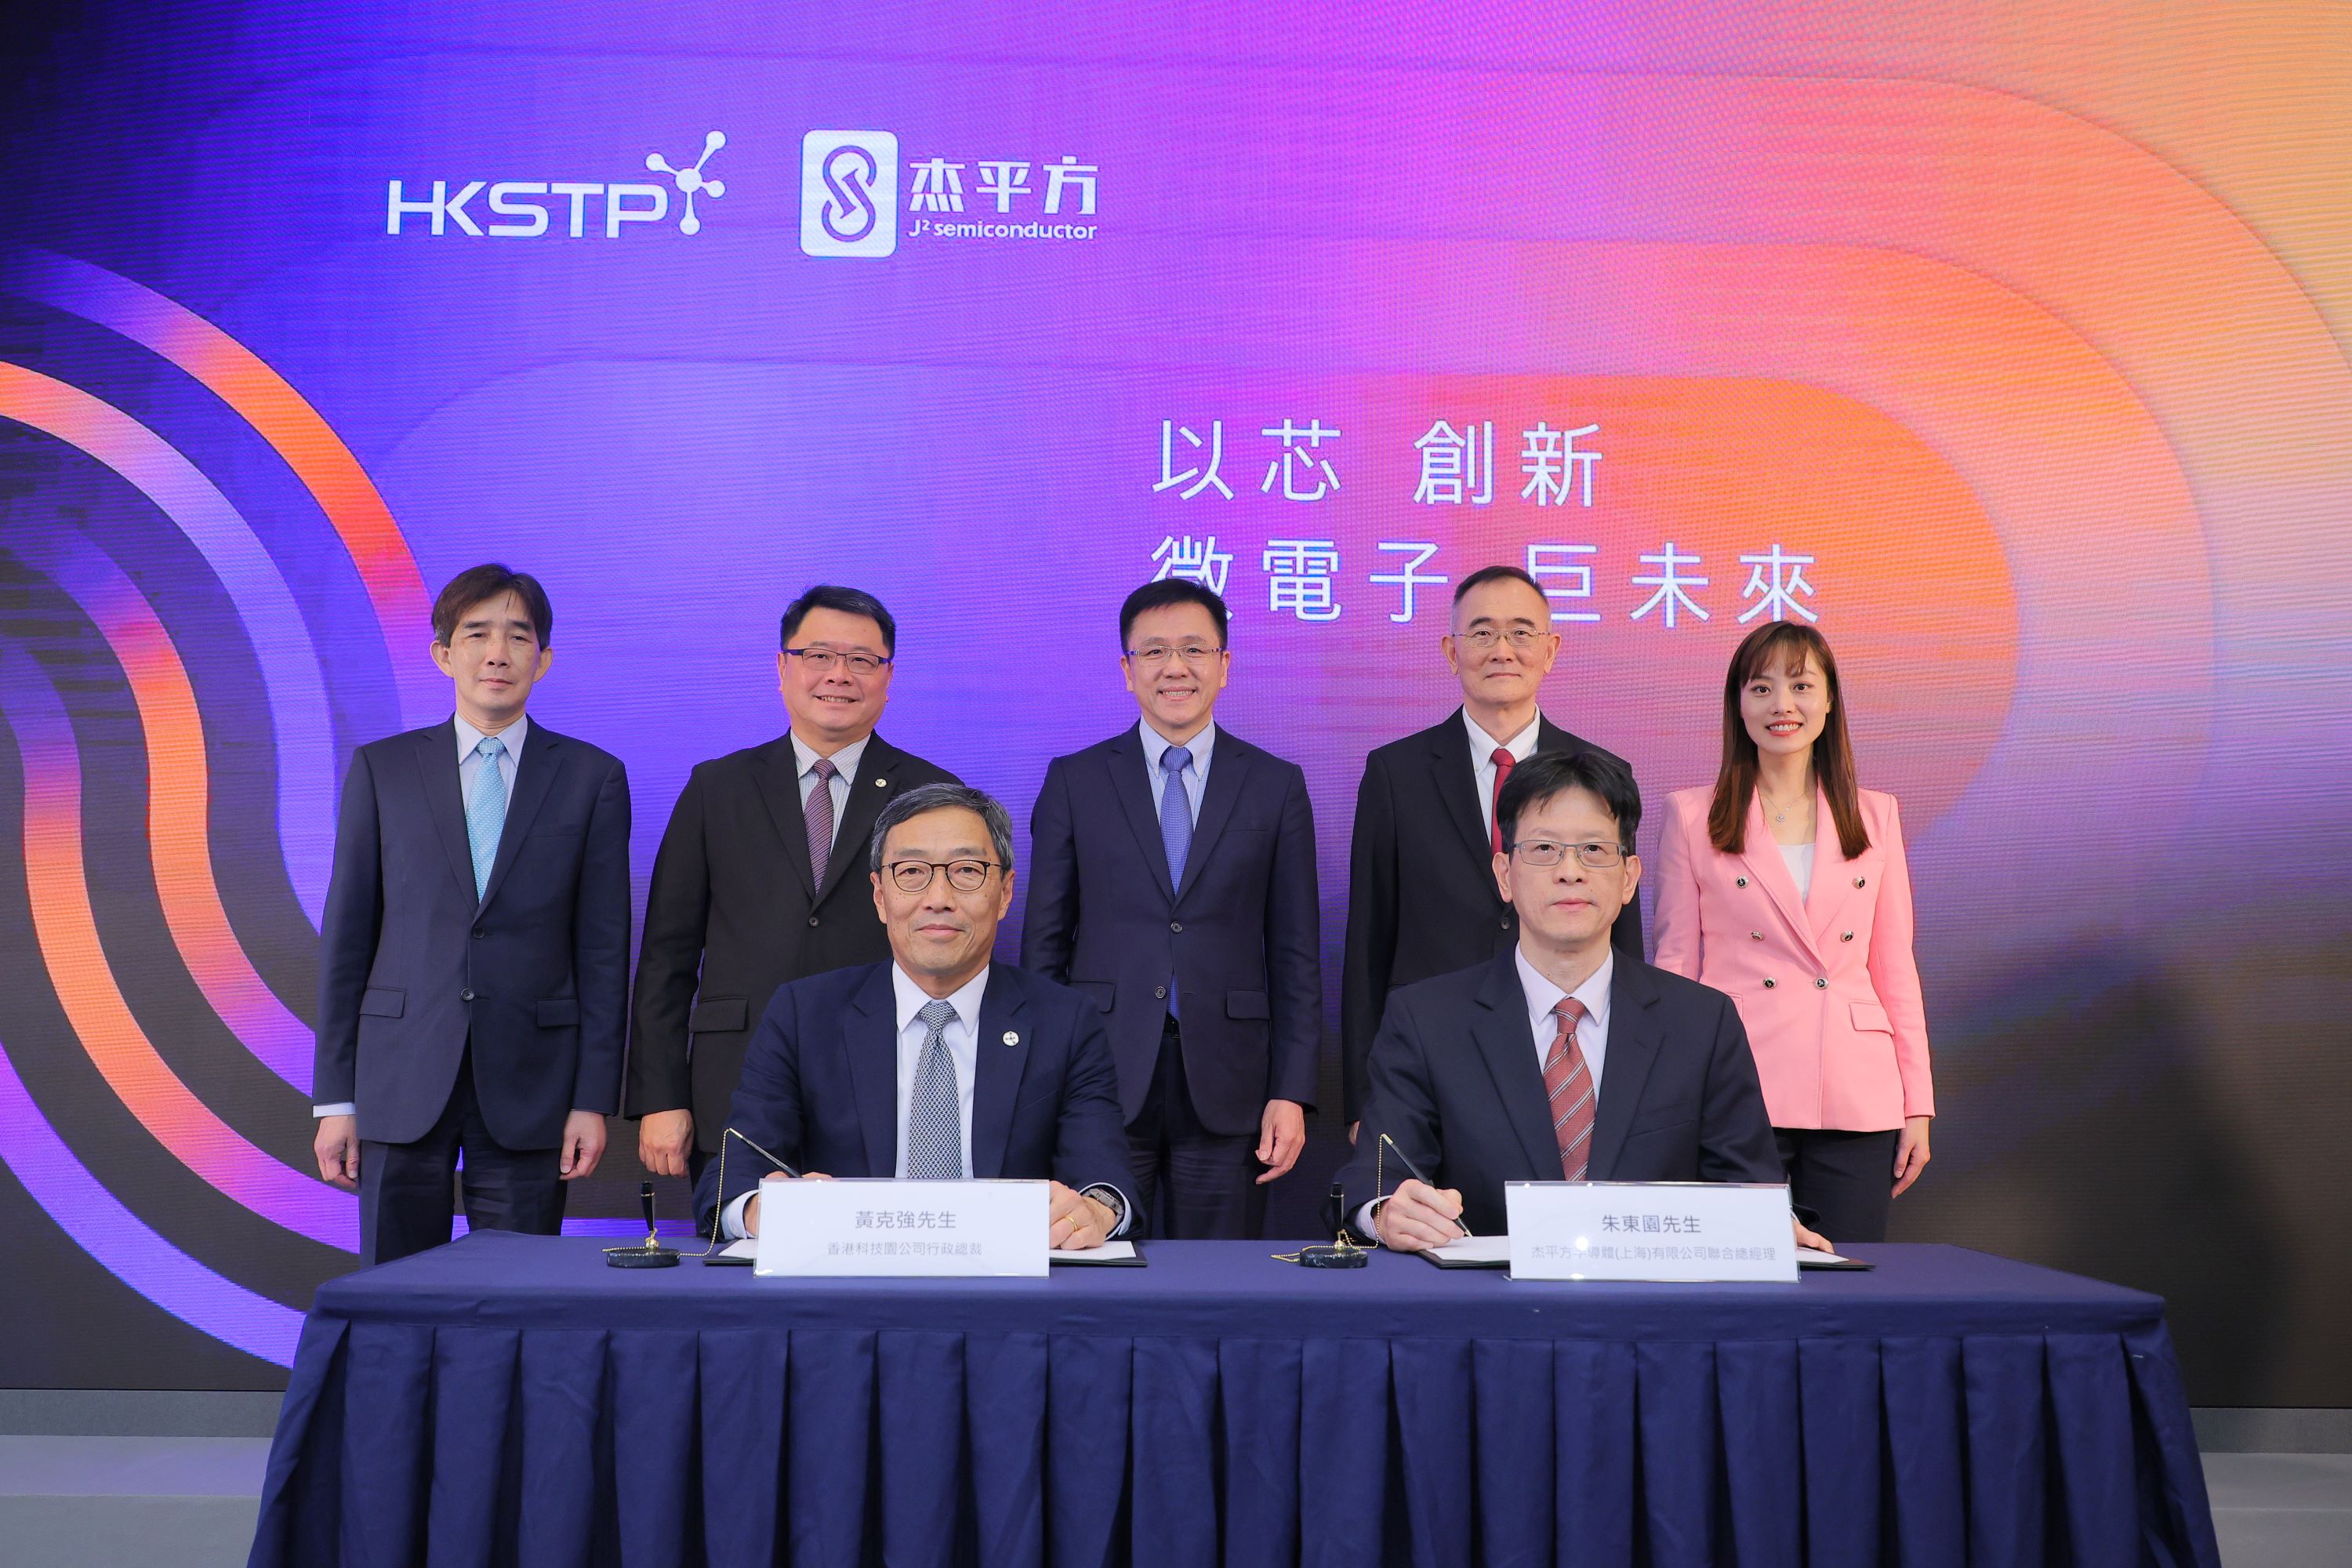 With the witness of Professor Sun Dong, Secretary of Innovation, Technology and Industry Bureau (last row, middle), Mr Philip Yung, General Director of OASES (last row, first from left), Ms Lillian Cheong, Under Secretary for Innovation, Technology and Industry (last row, first from right), Dr Sunny Chai, Chairman of HKSTP (last row, second from left), Dr Robert Tsu, Chairman of J2 Semiconductor (last row, second from right), Mr Albert Wong, CEO of HKSTP (first row, left) and Mr TY Chu, Co-CEO of J2 Semiconductor (first row, right) signed the MoU.